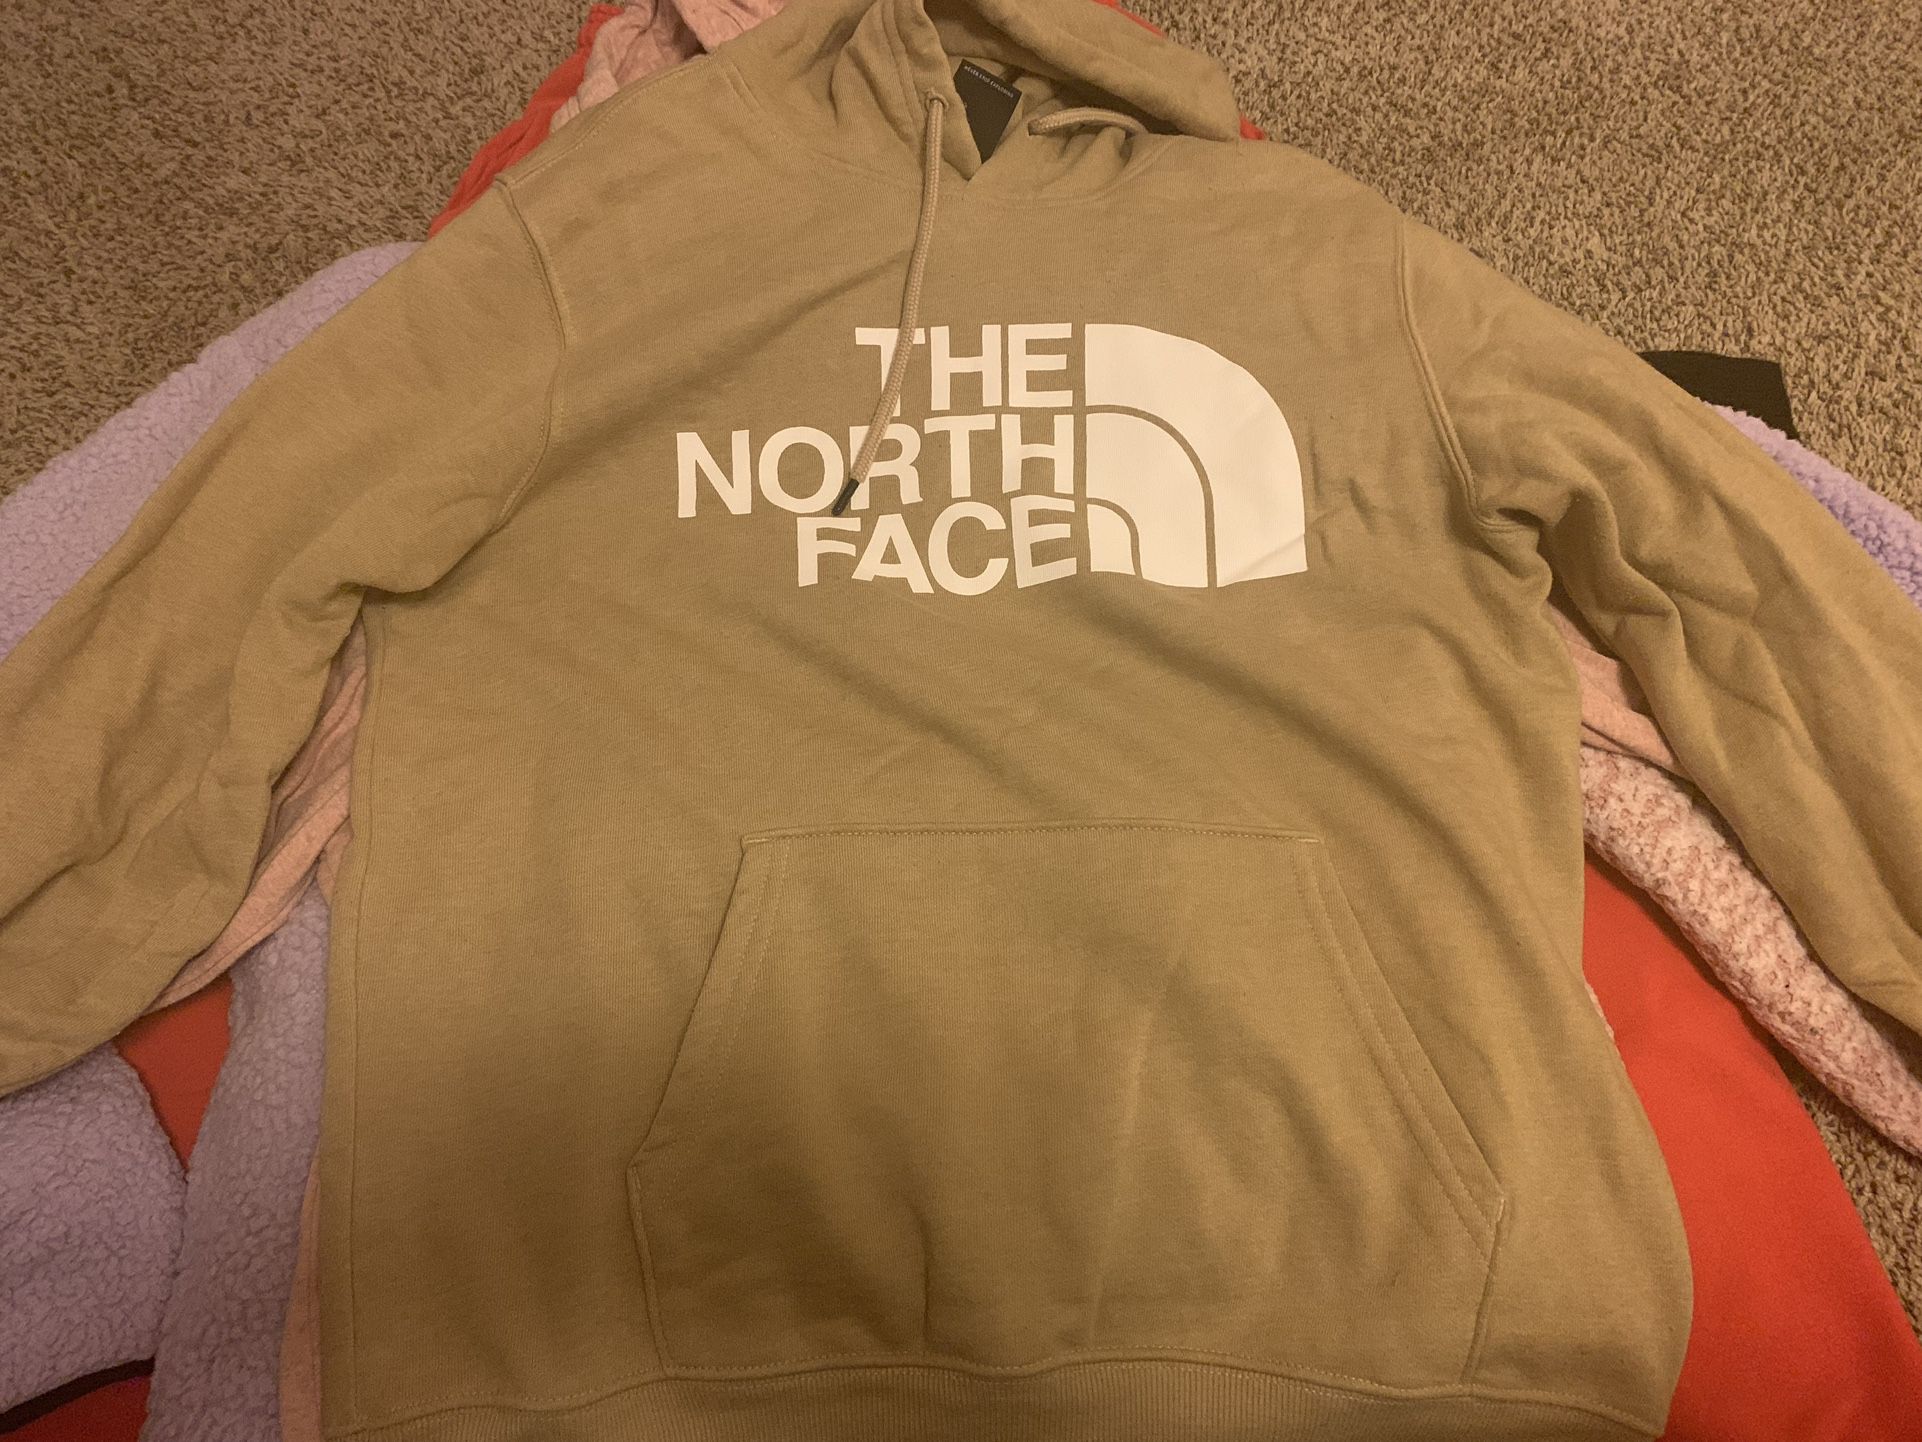 The North face Hoodie Great Shape Size Small 